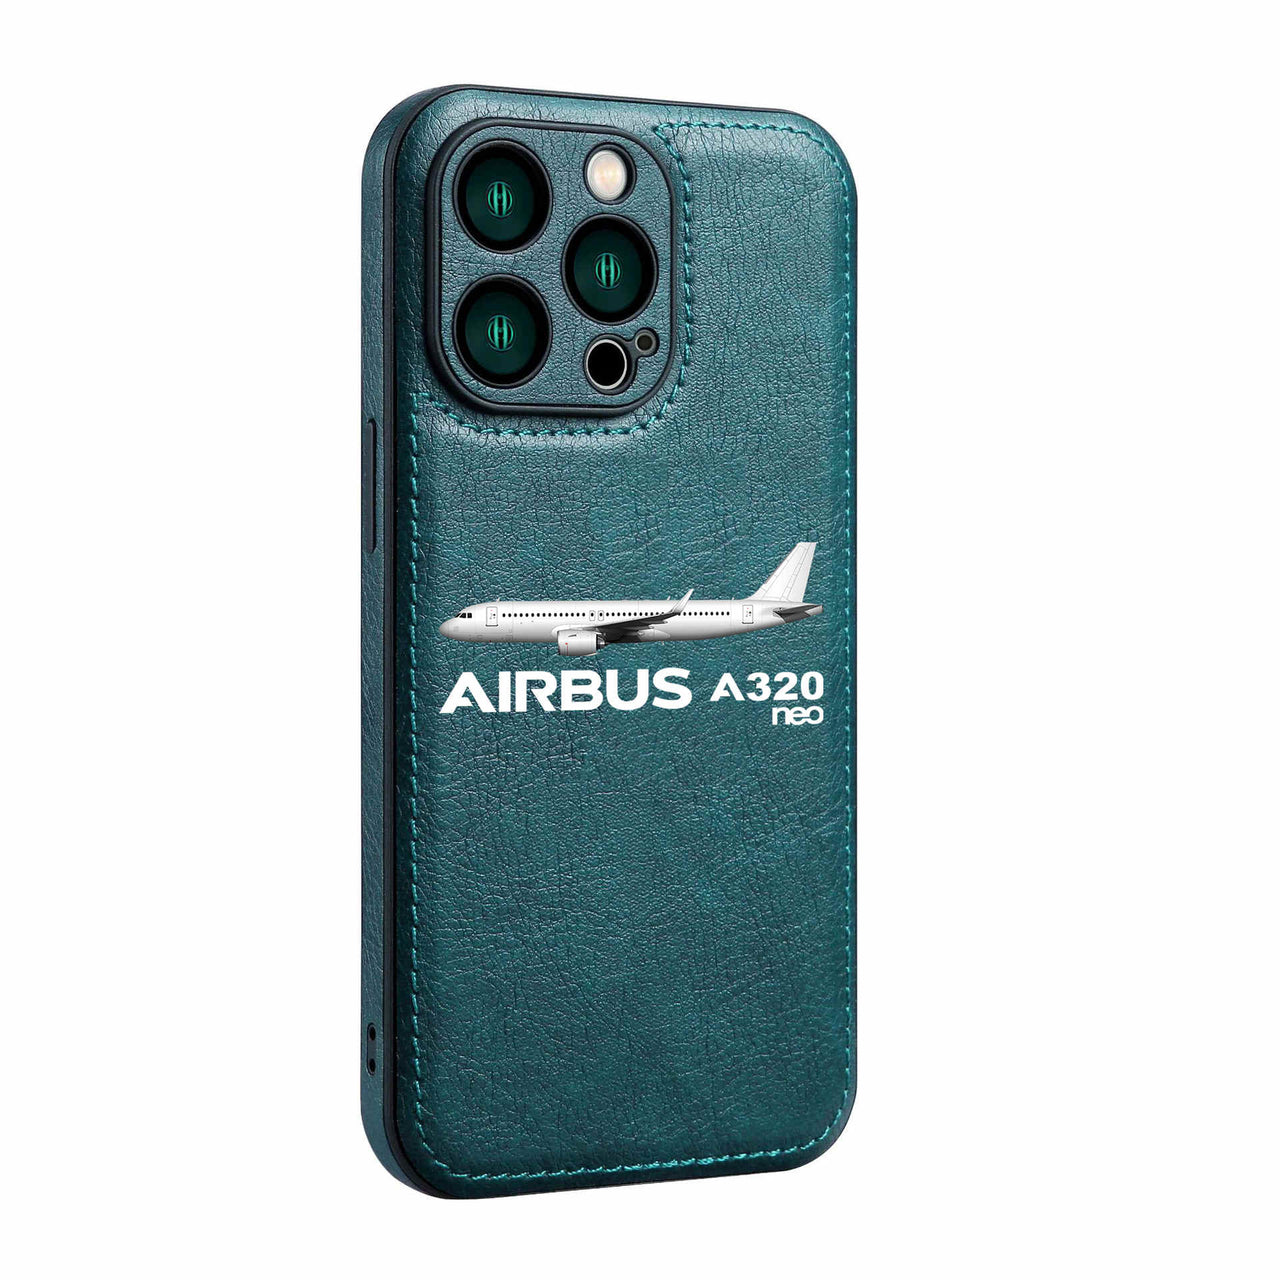 The Airbus A320Neo Designed Leather iPhone Cases